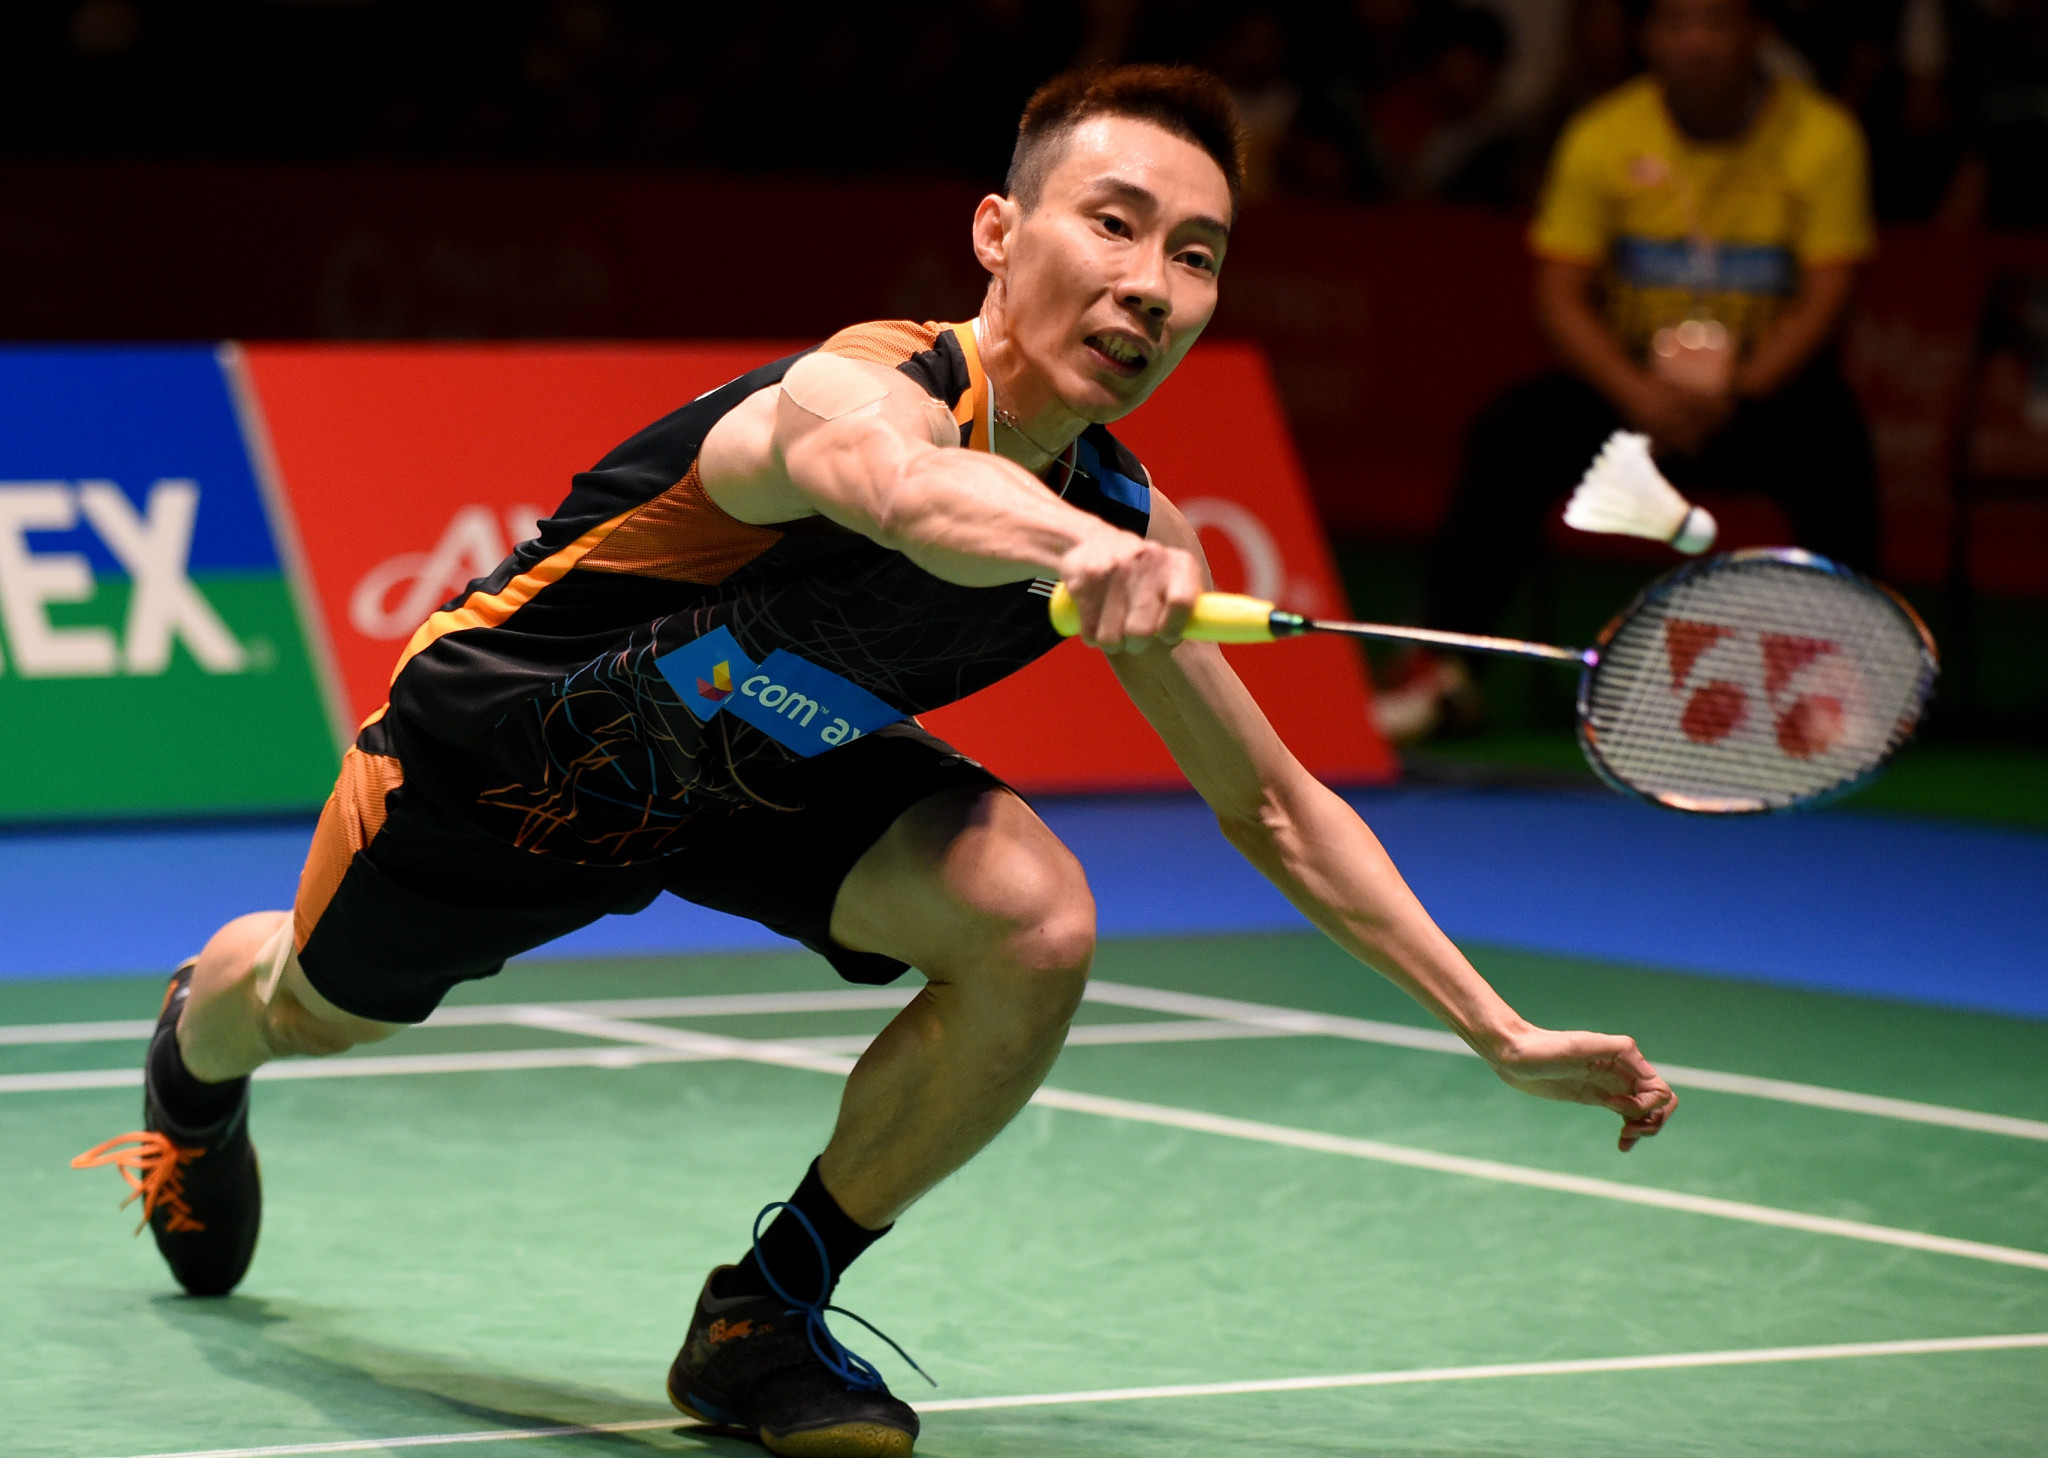 Lee Chong Wei will let the Badminton Association of Malaysia decide whether he competes at Gold Coast 2018 ©Getty Images